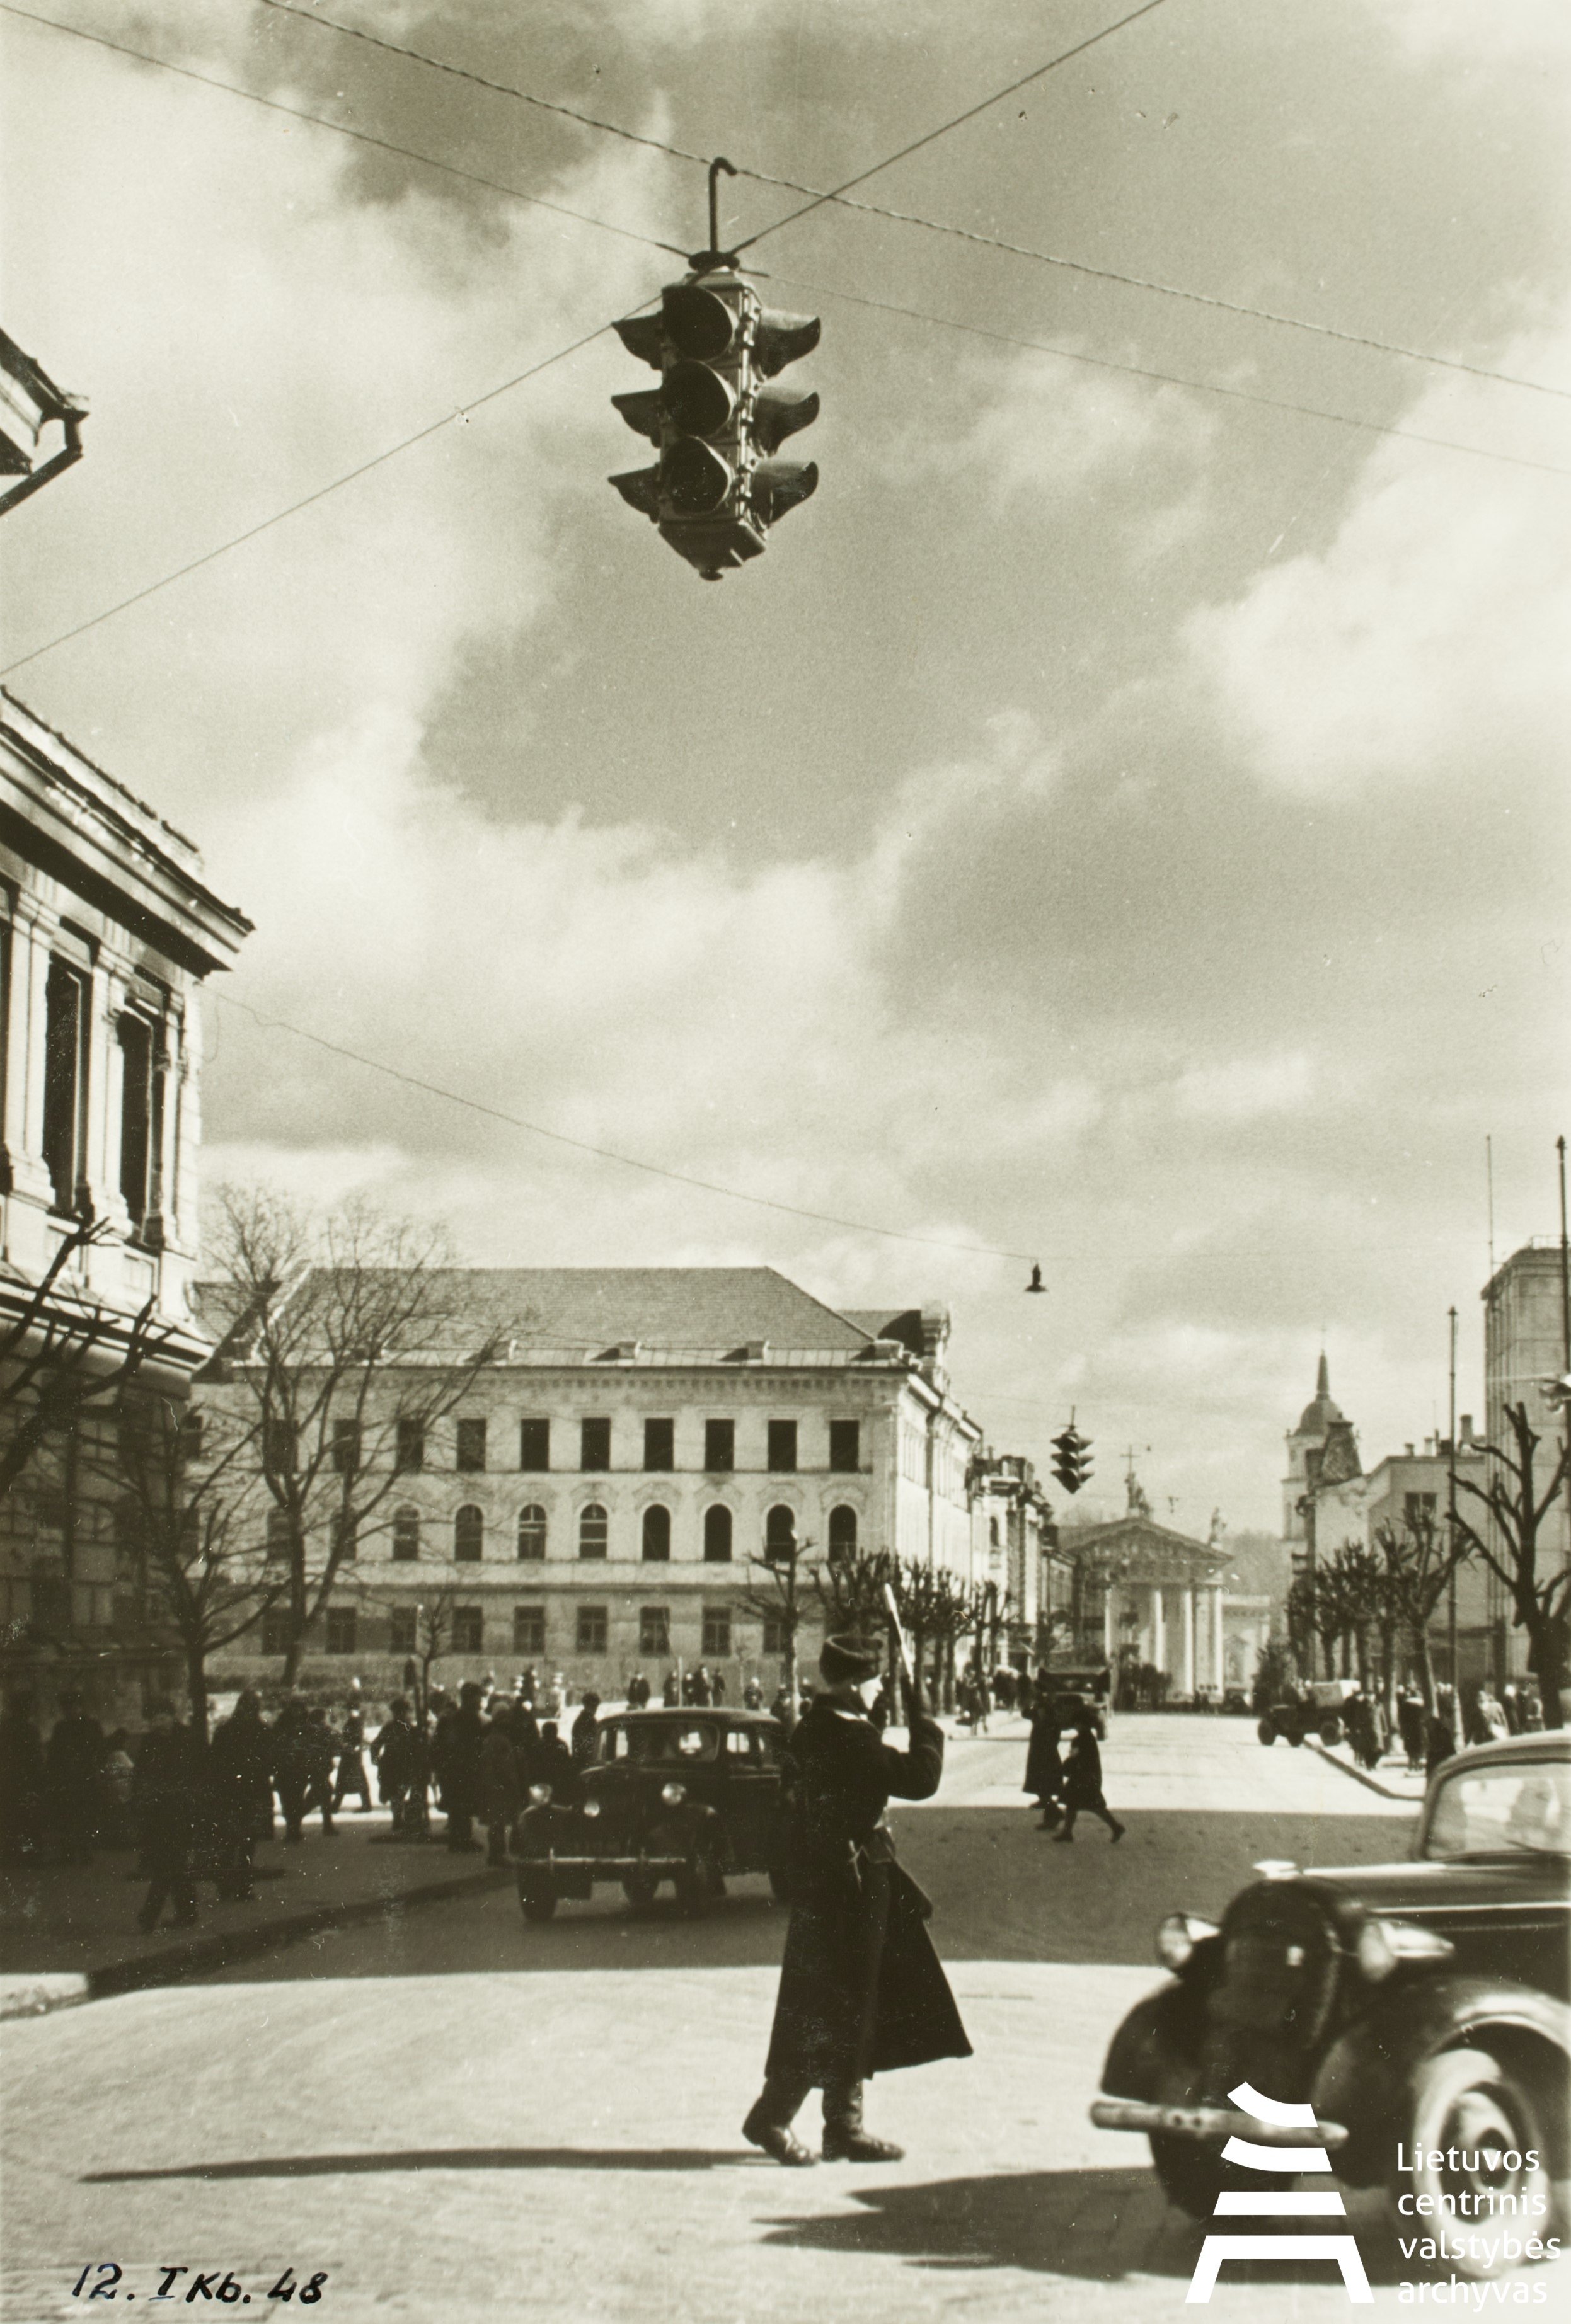 Lithuanian Central State Archives, A police officer regulating traffic next to the Central Committee (CK) building of the Lithuanian Communist Party (LKP) on Gediminas Avenue, Vilnius, Lithuania. 1947-1949.